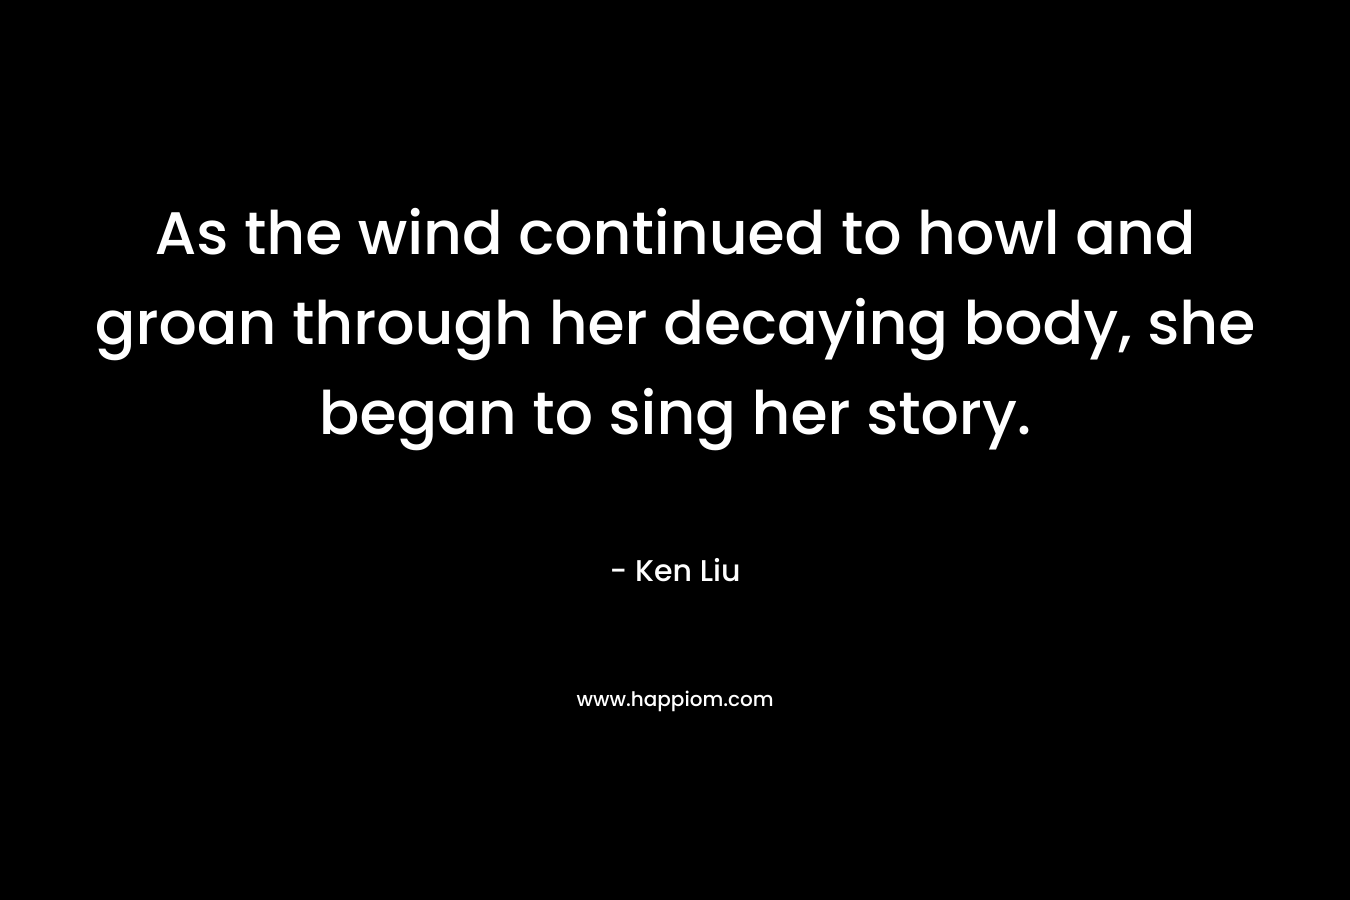 As the wind continued to howl and groan through her decaying body, she began to sing her story. – Ken Liu